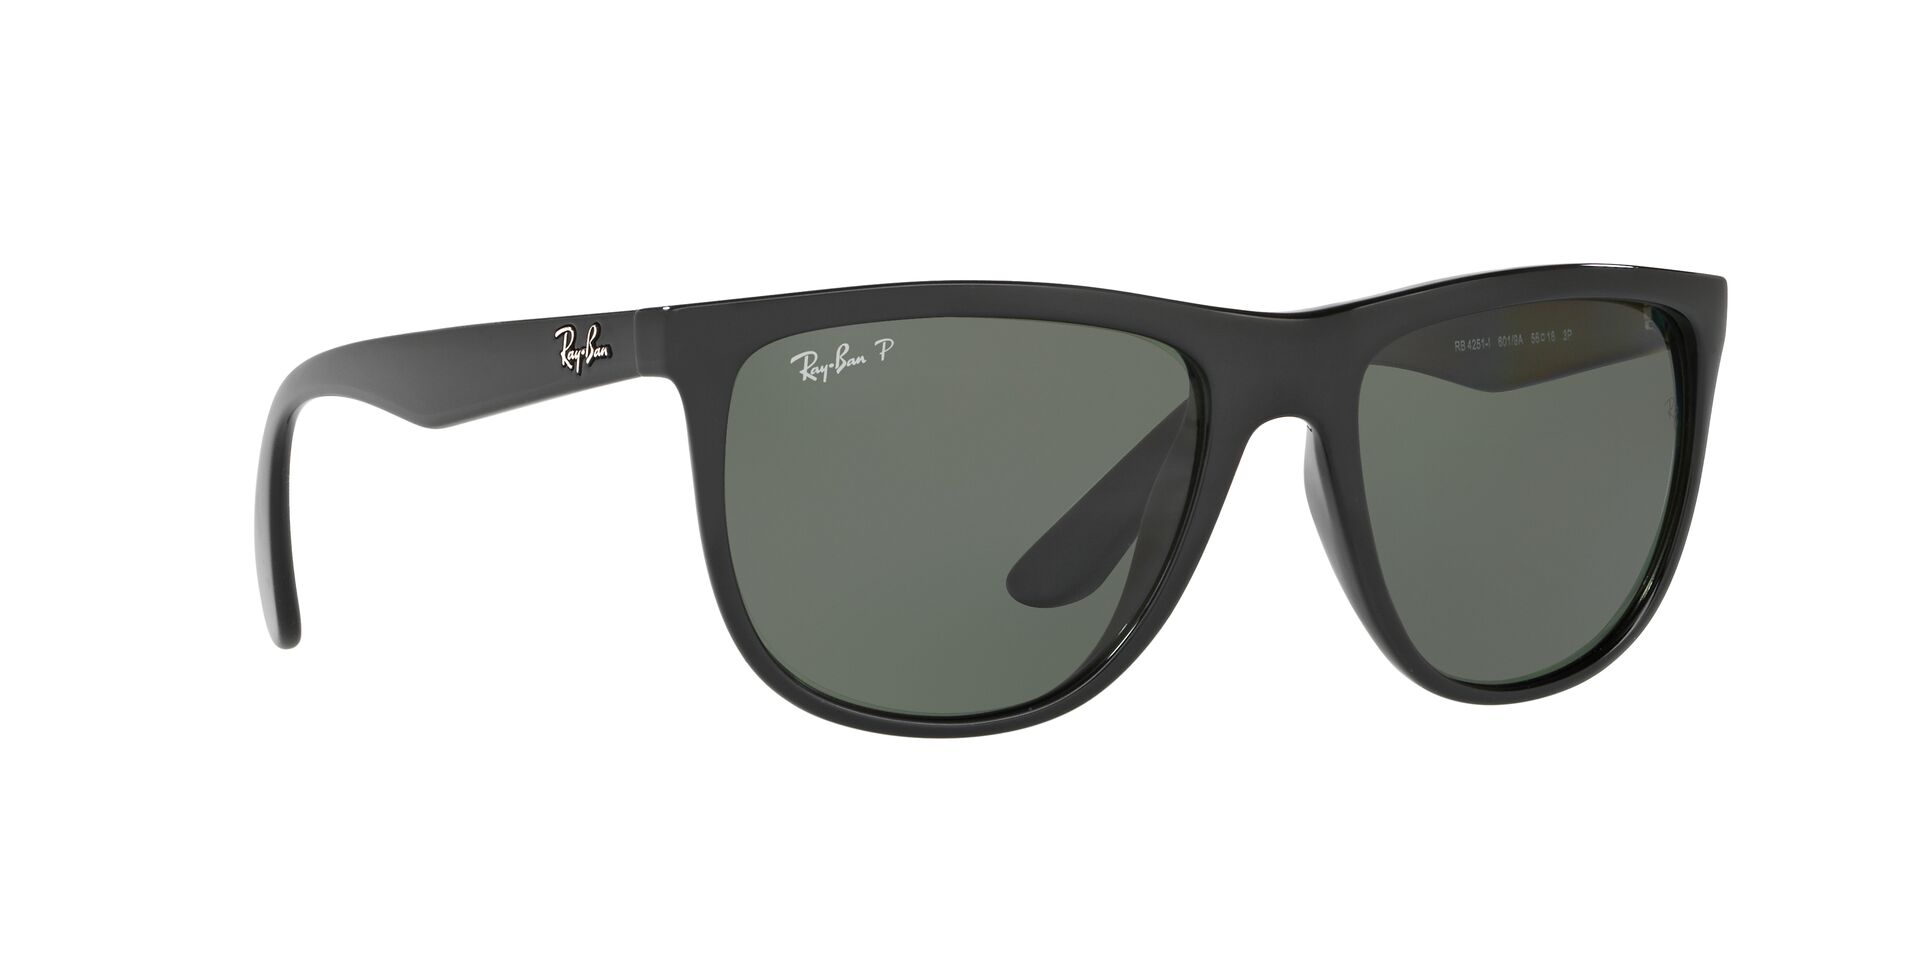 Buy Ray-Ban Rb4251 Sunglasses Online.